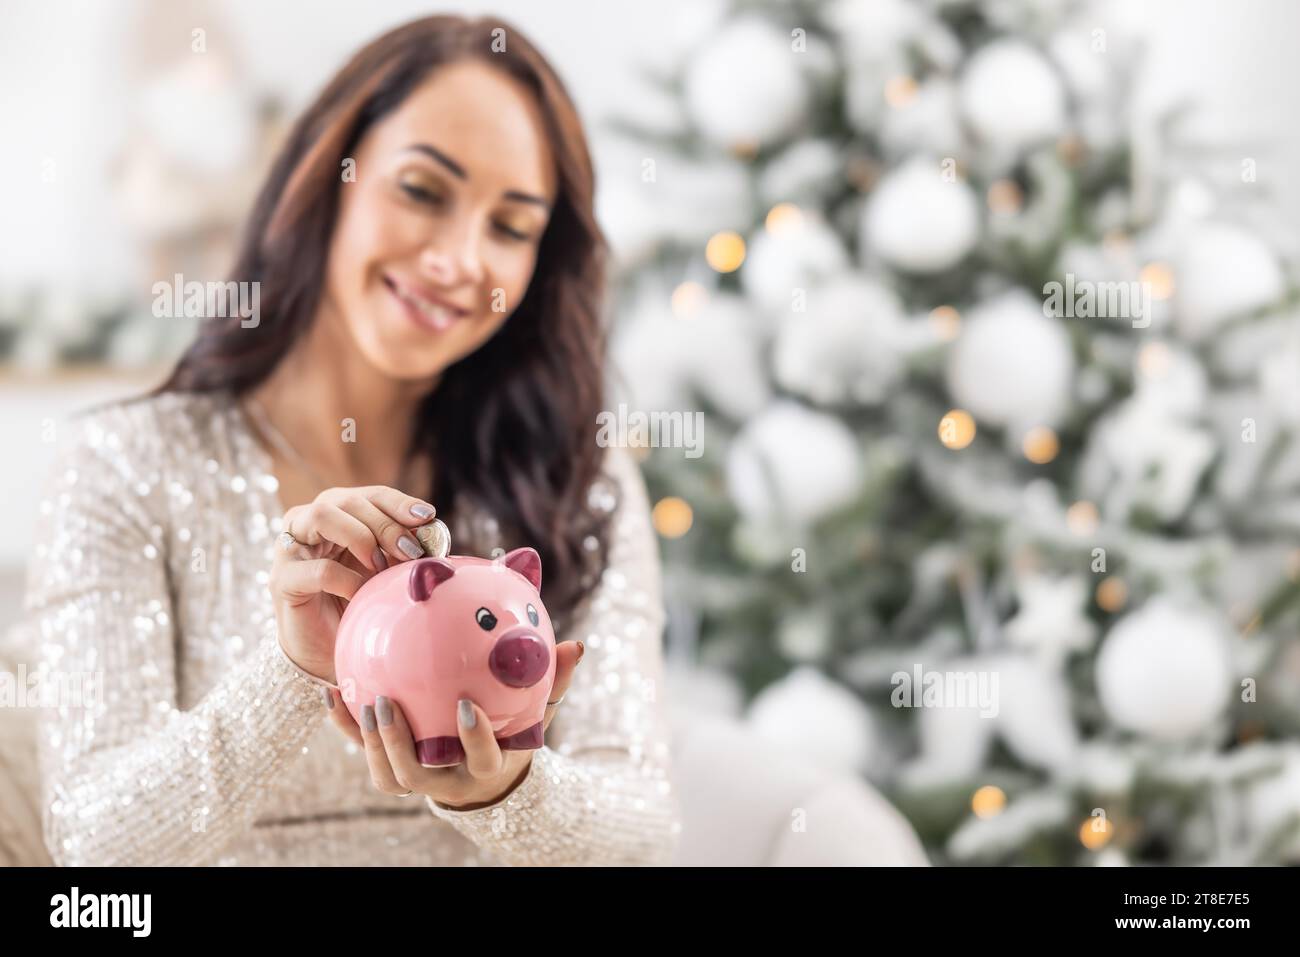 Woman saving money for Christmas while putting a two euro coin into a piggy bank. Stock Photo